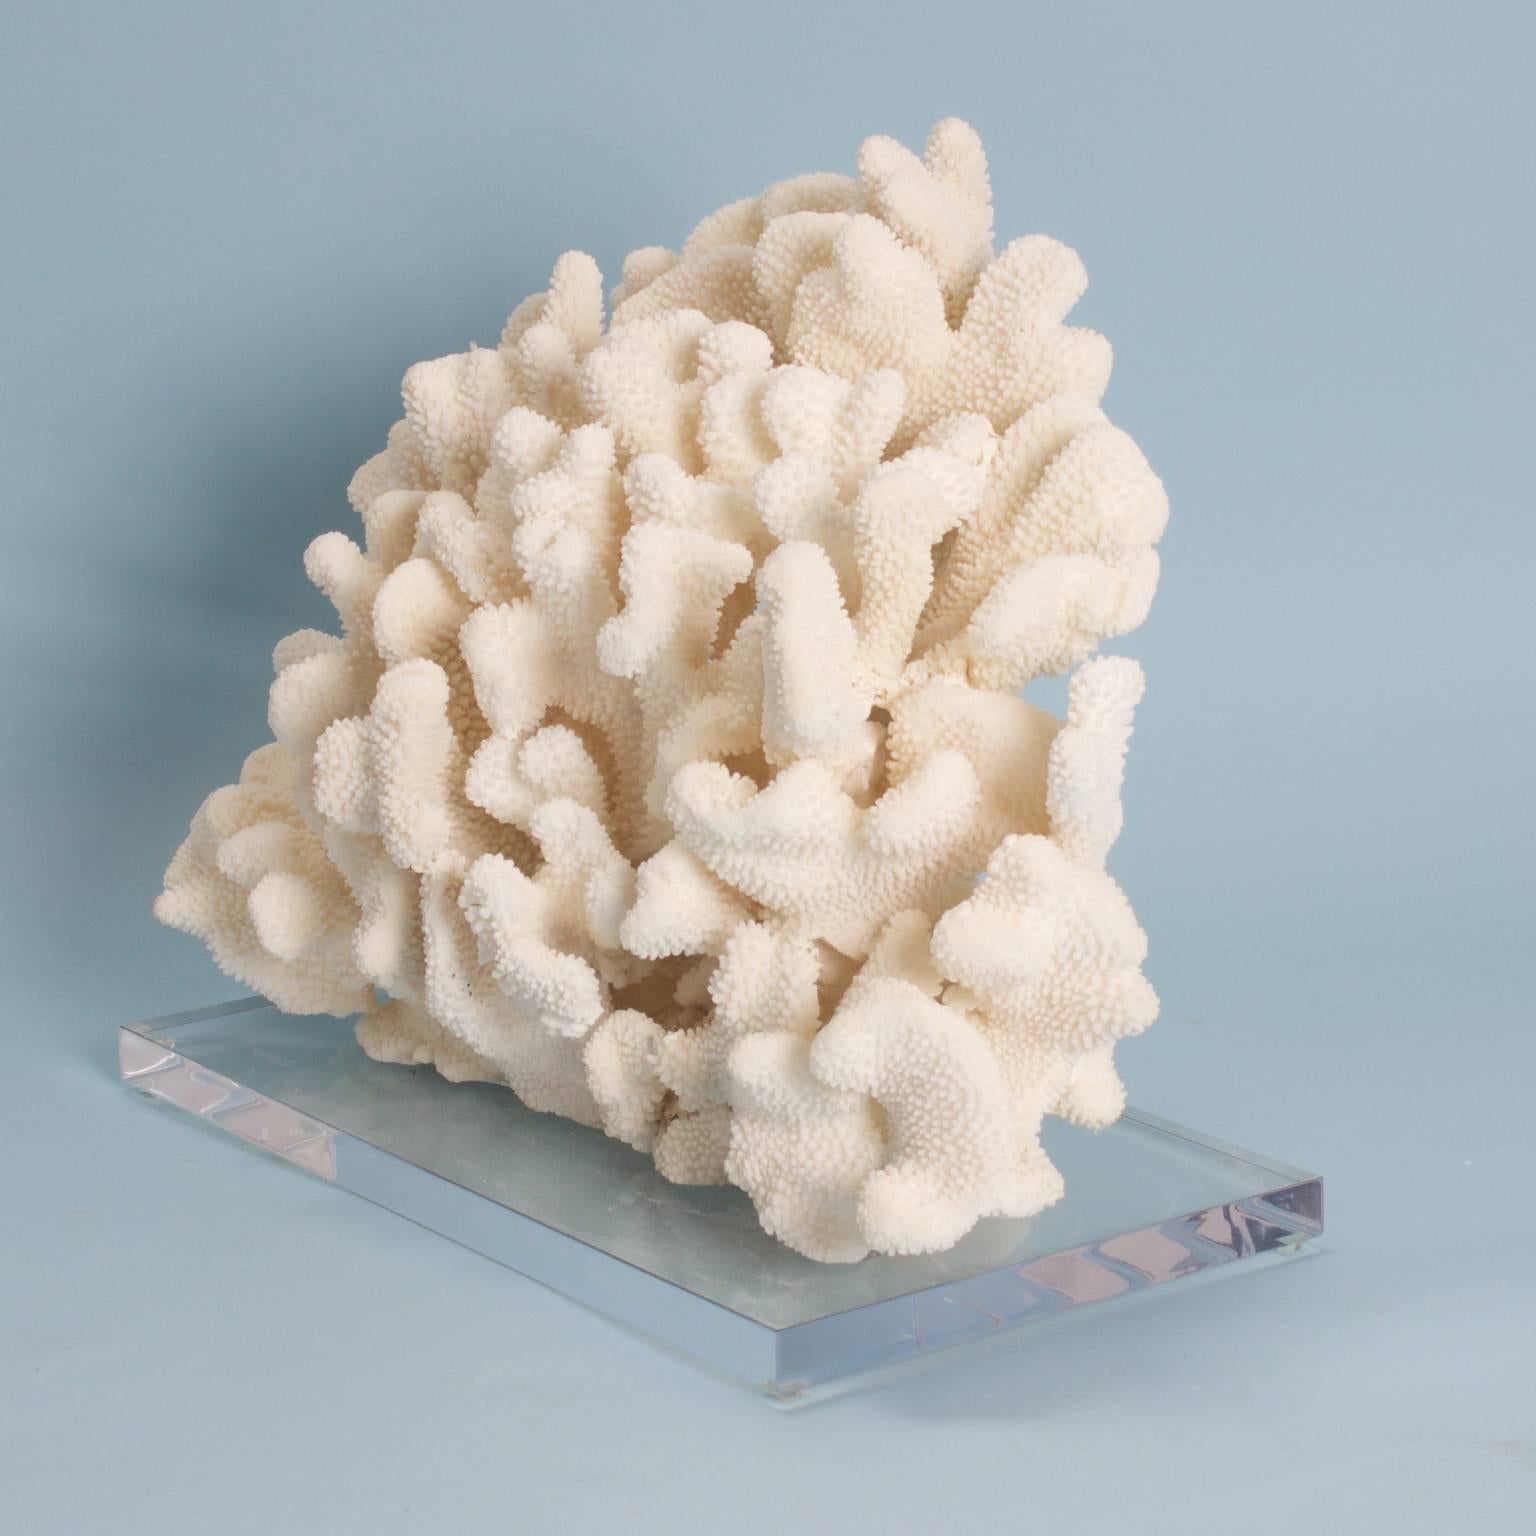 Impressive cauliflower coral sculpture presented on a Lucite base, designed and crafted by F.S. Henemader with respect to Mother Nature from authentic coral. Assembled in a way that enhances the organic texture, yet has a modern presentation.

This